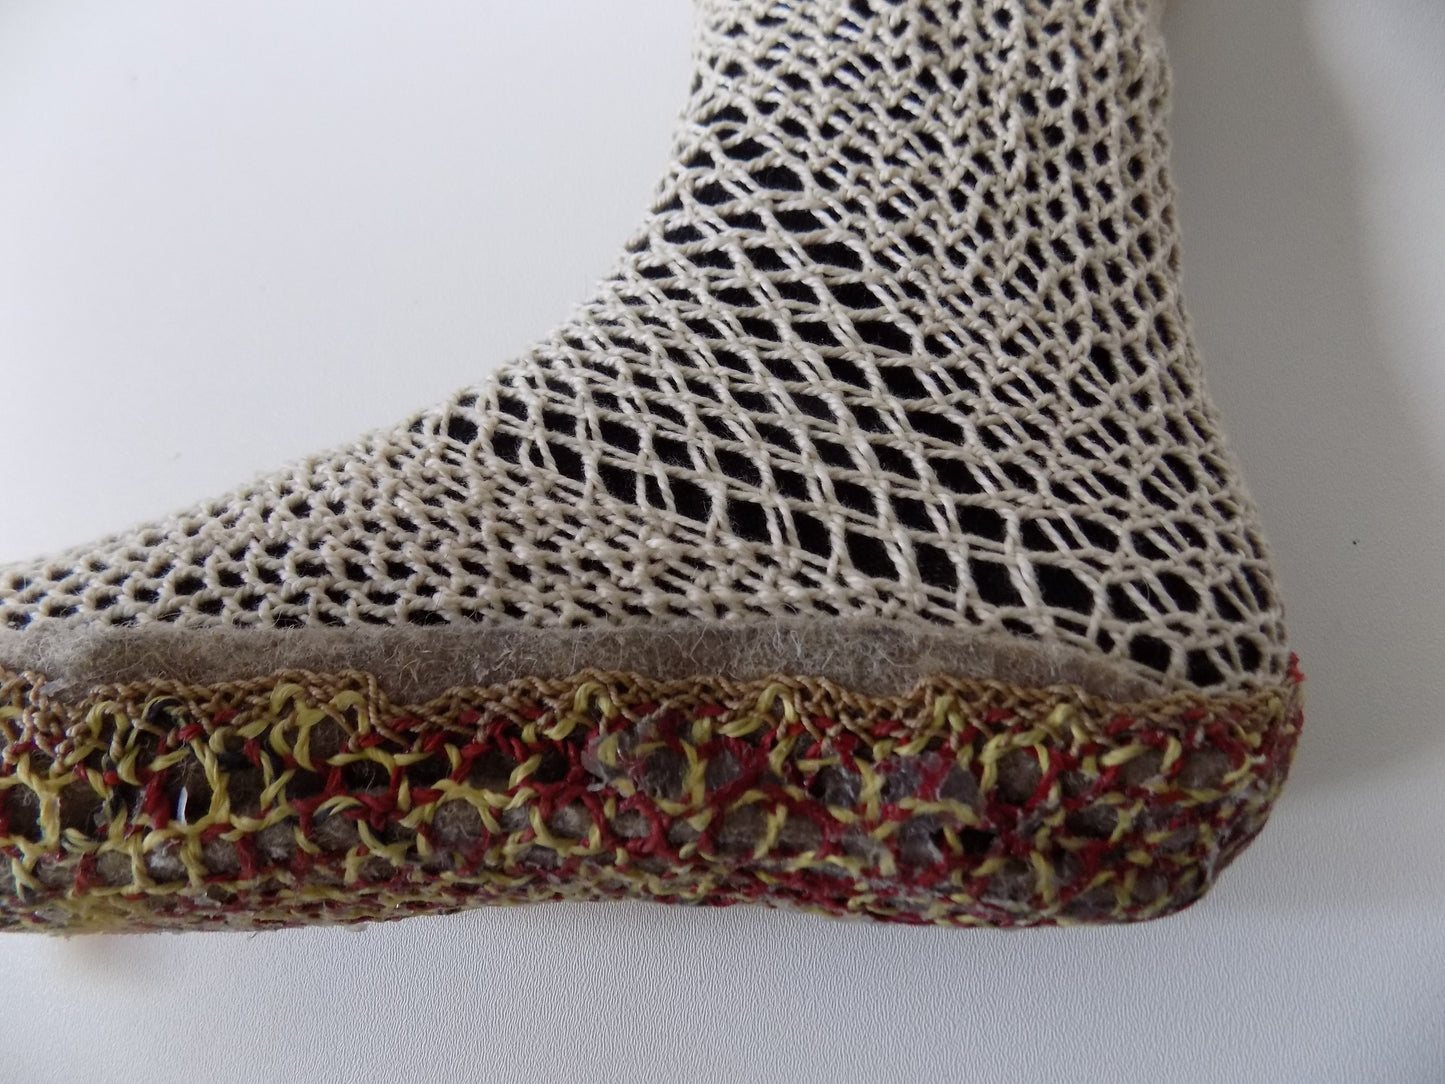 Footwear Laceless with Integrated Composite Sole